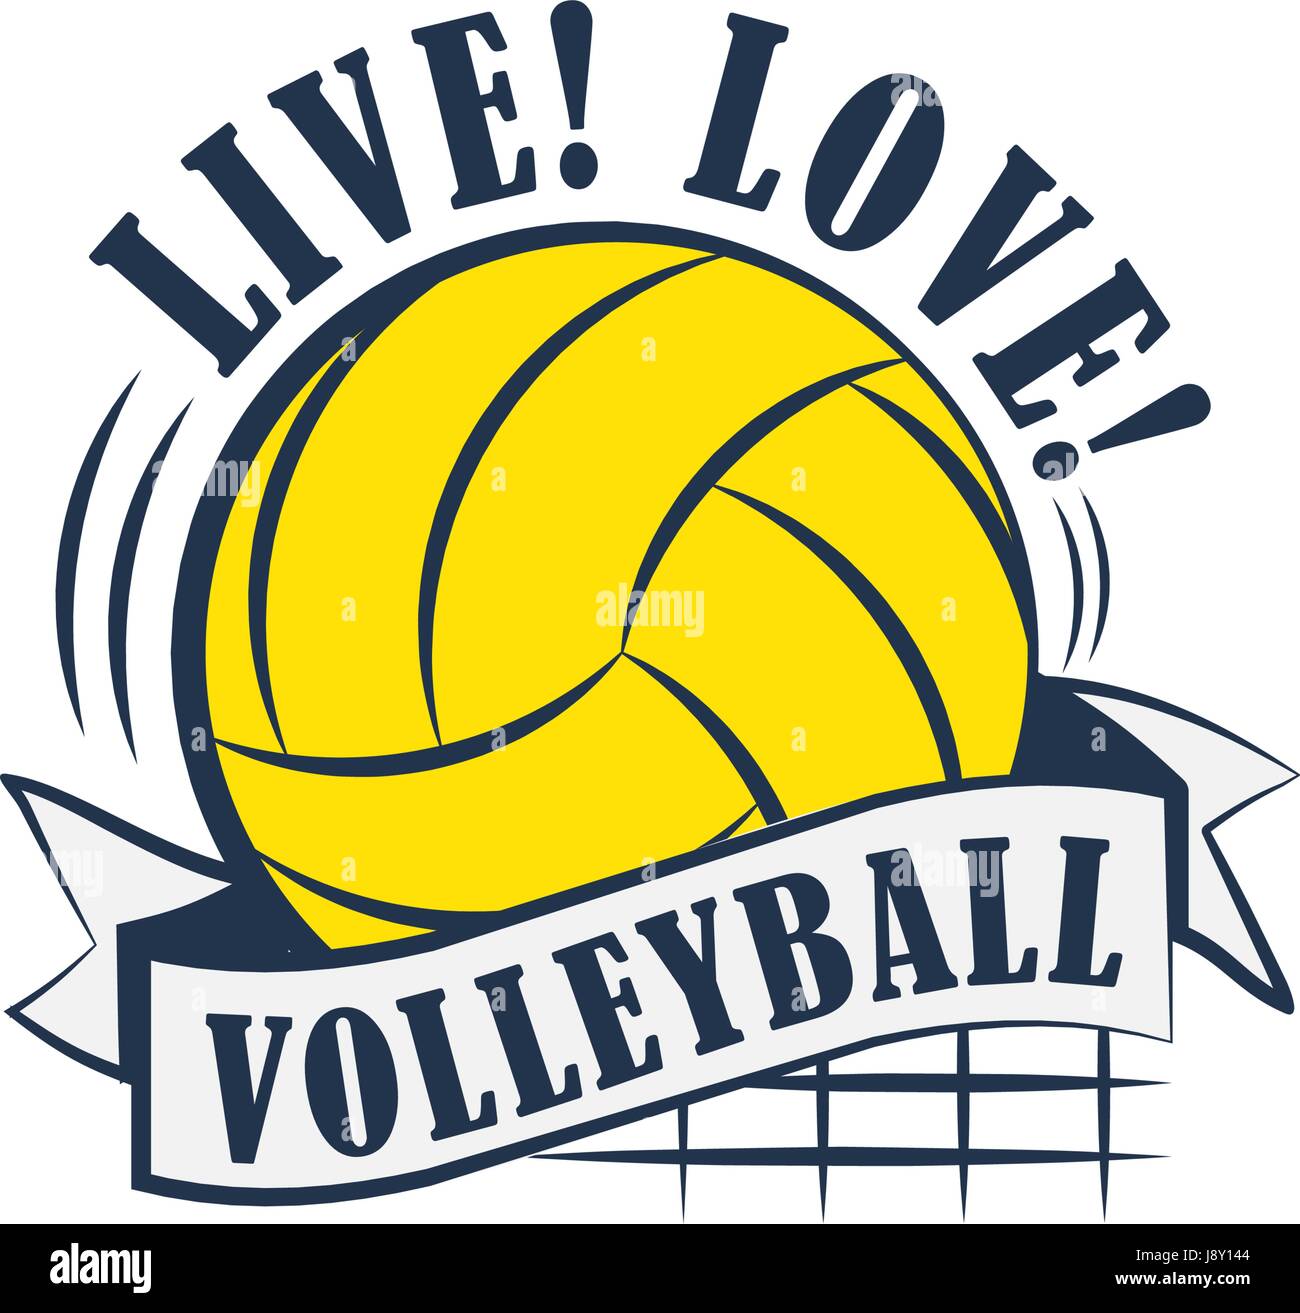 Vector illustration of yellow colored ball with live love volleyball text logo Stock Vector Image and Art